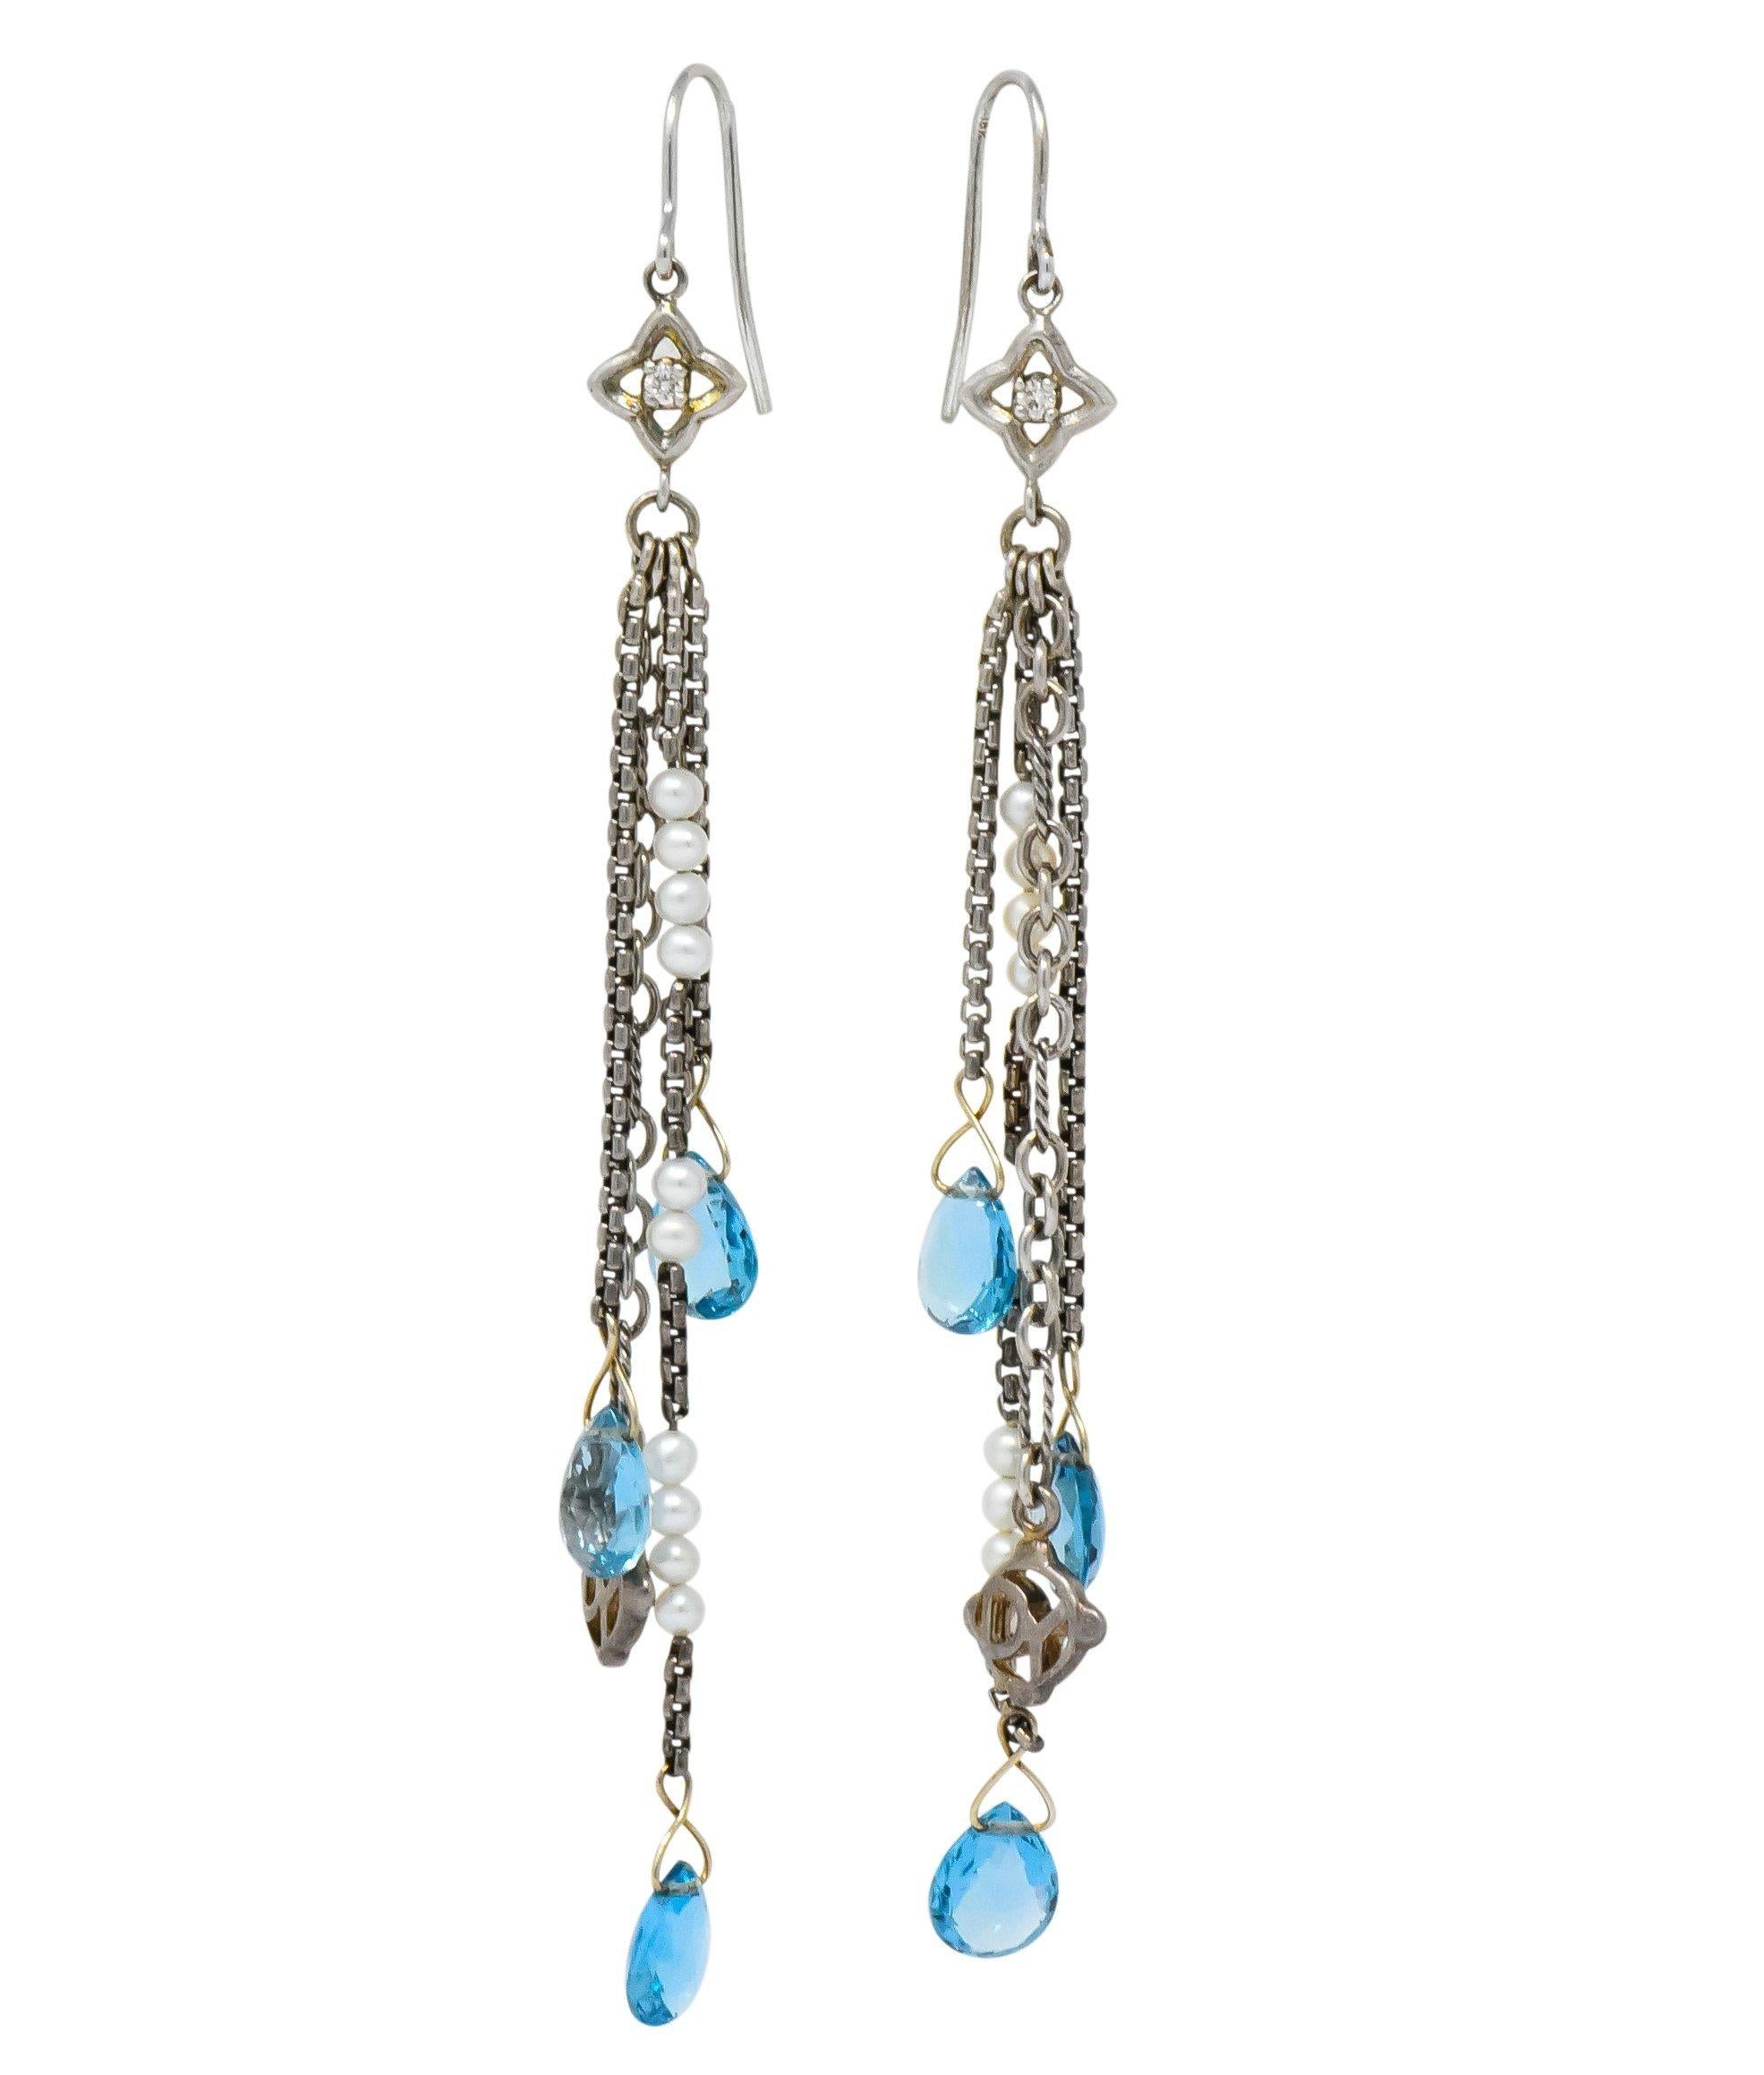 Tassel style drop earrings designed with a quatrefoil surmount centering a round brilliant cut diamond weighing in total 0.06 carat; eye-clean and white

Suspending silver cable chain strands, accented by 3.0 mm seed pearls and the David Yurman logo